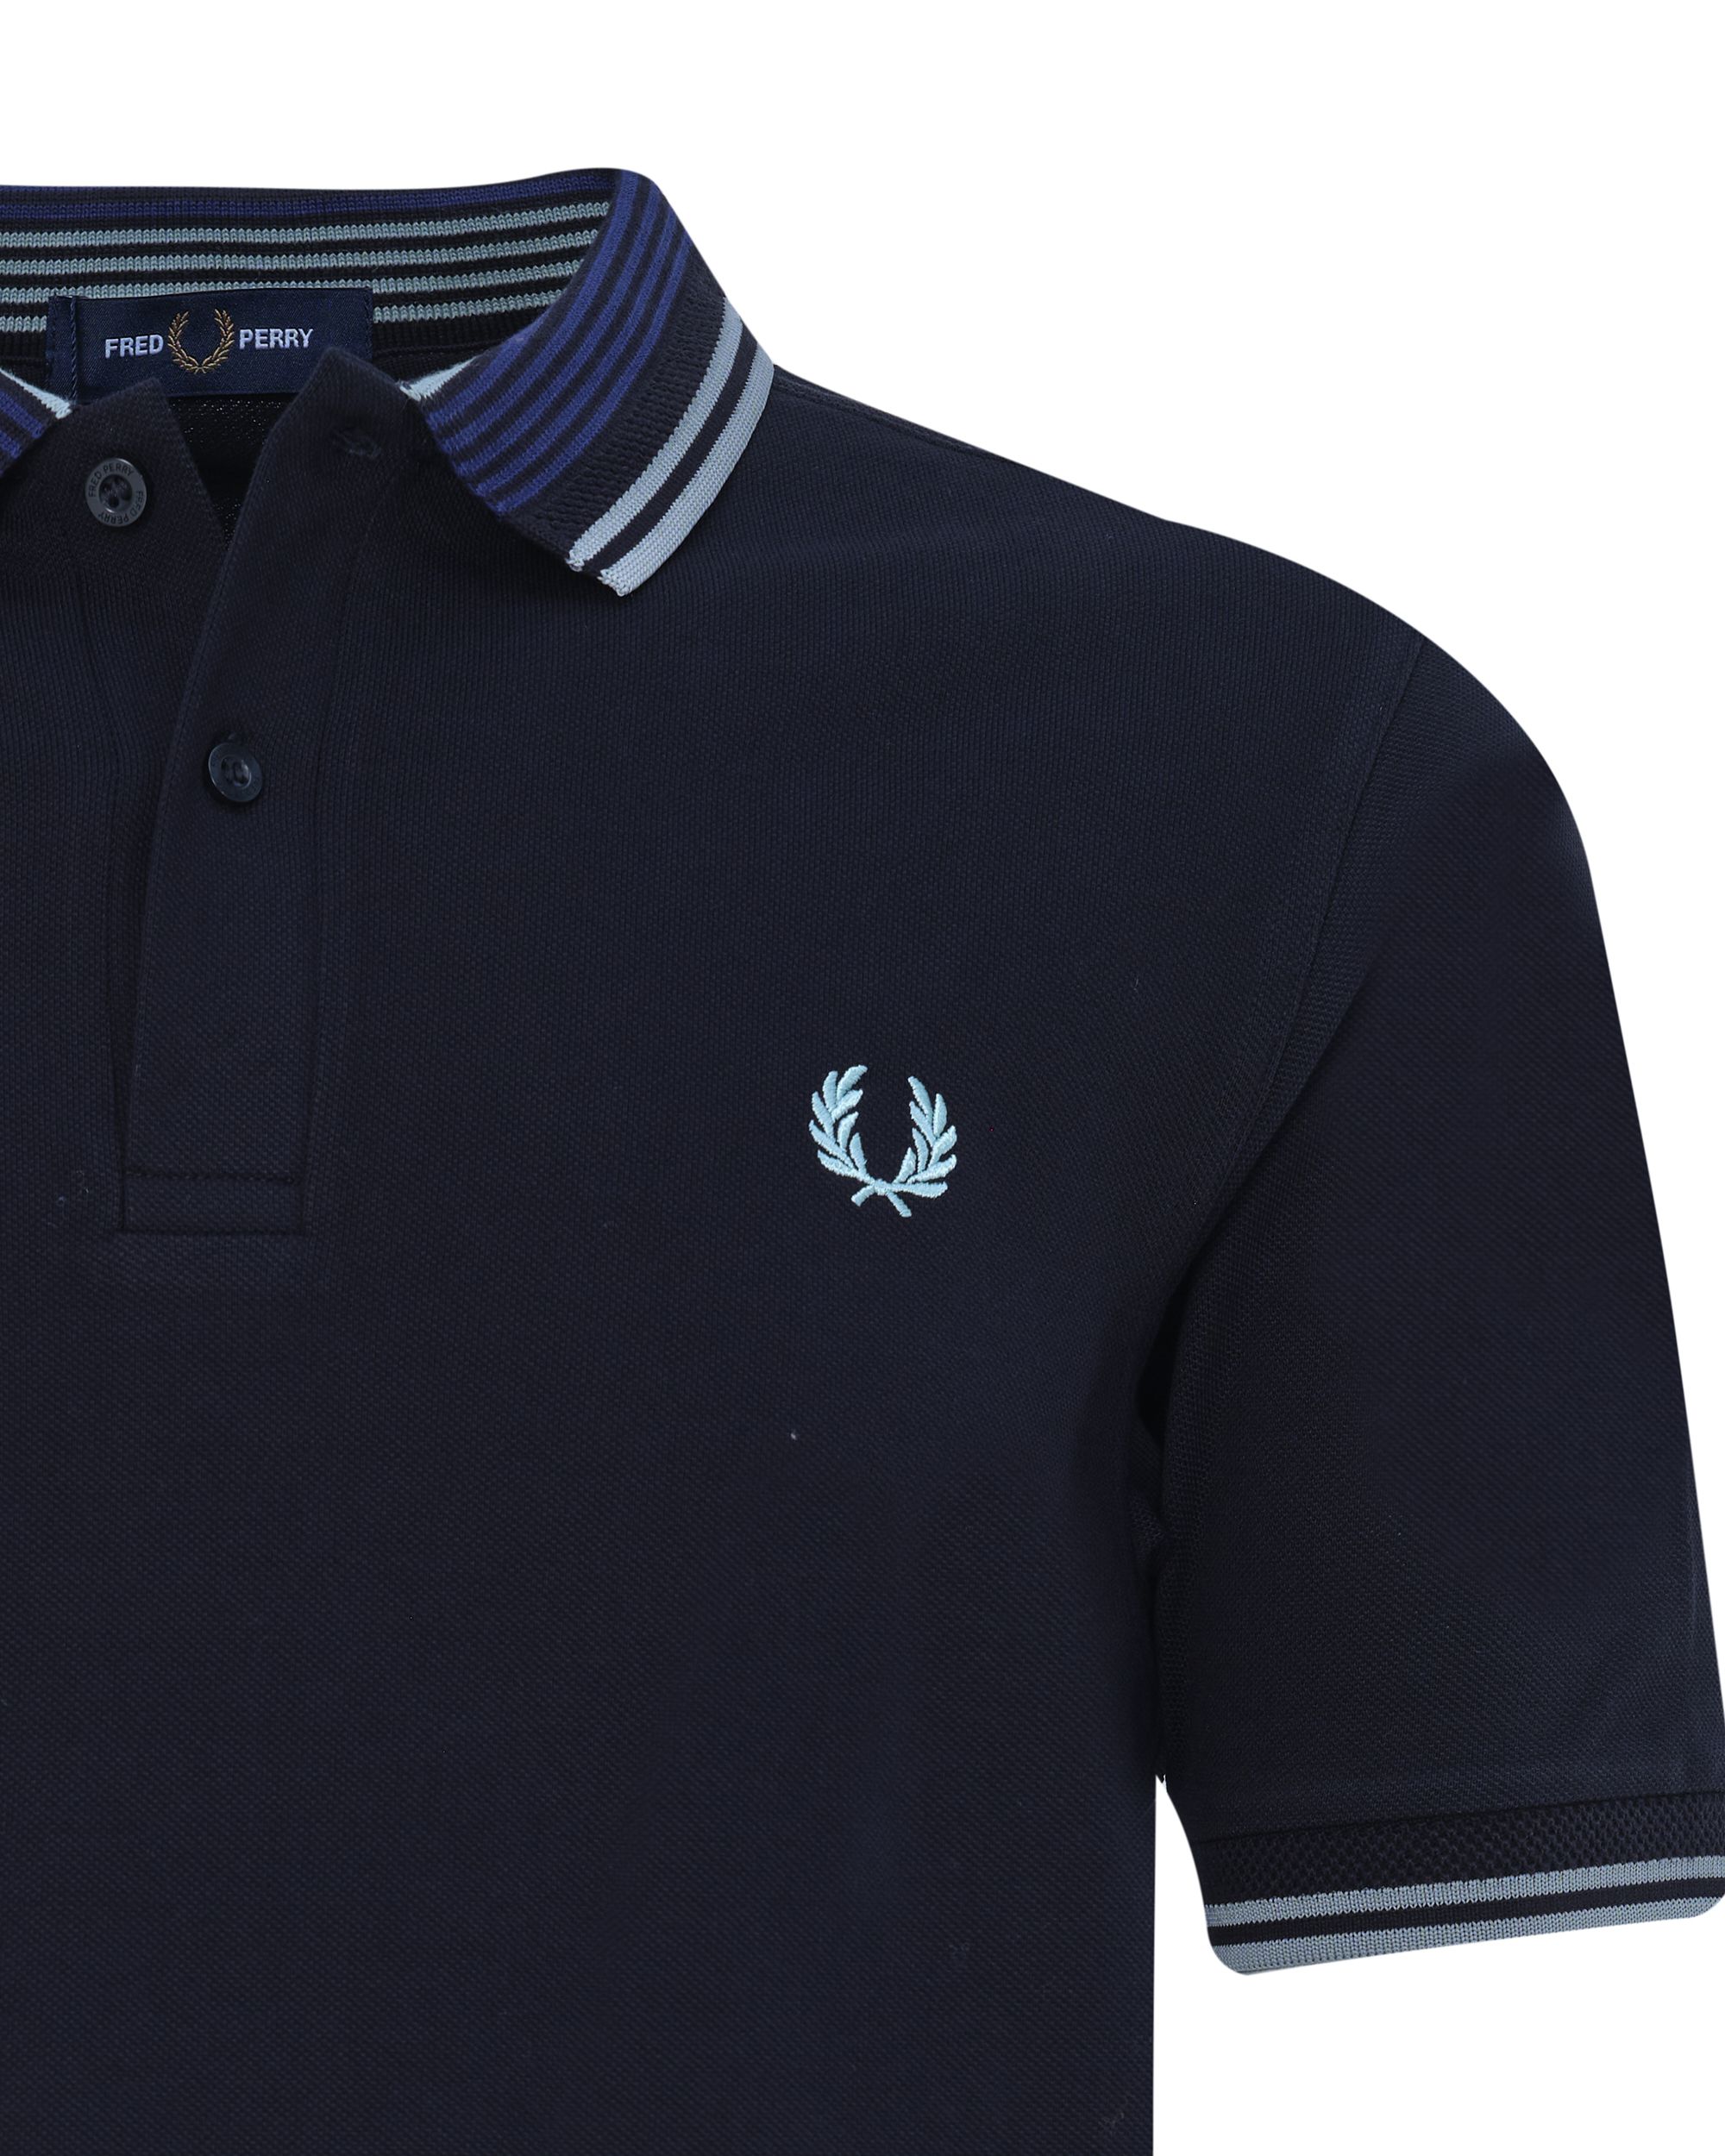 Fred Perry Polo KM Zwart 080352-001-L